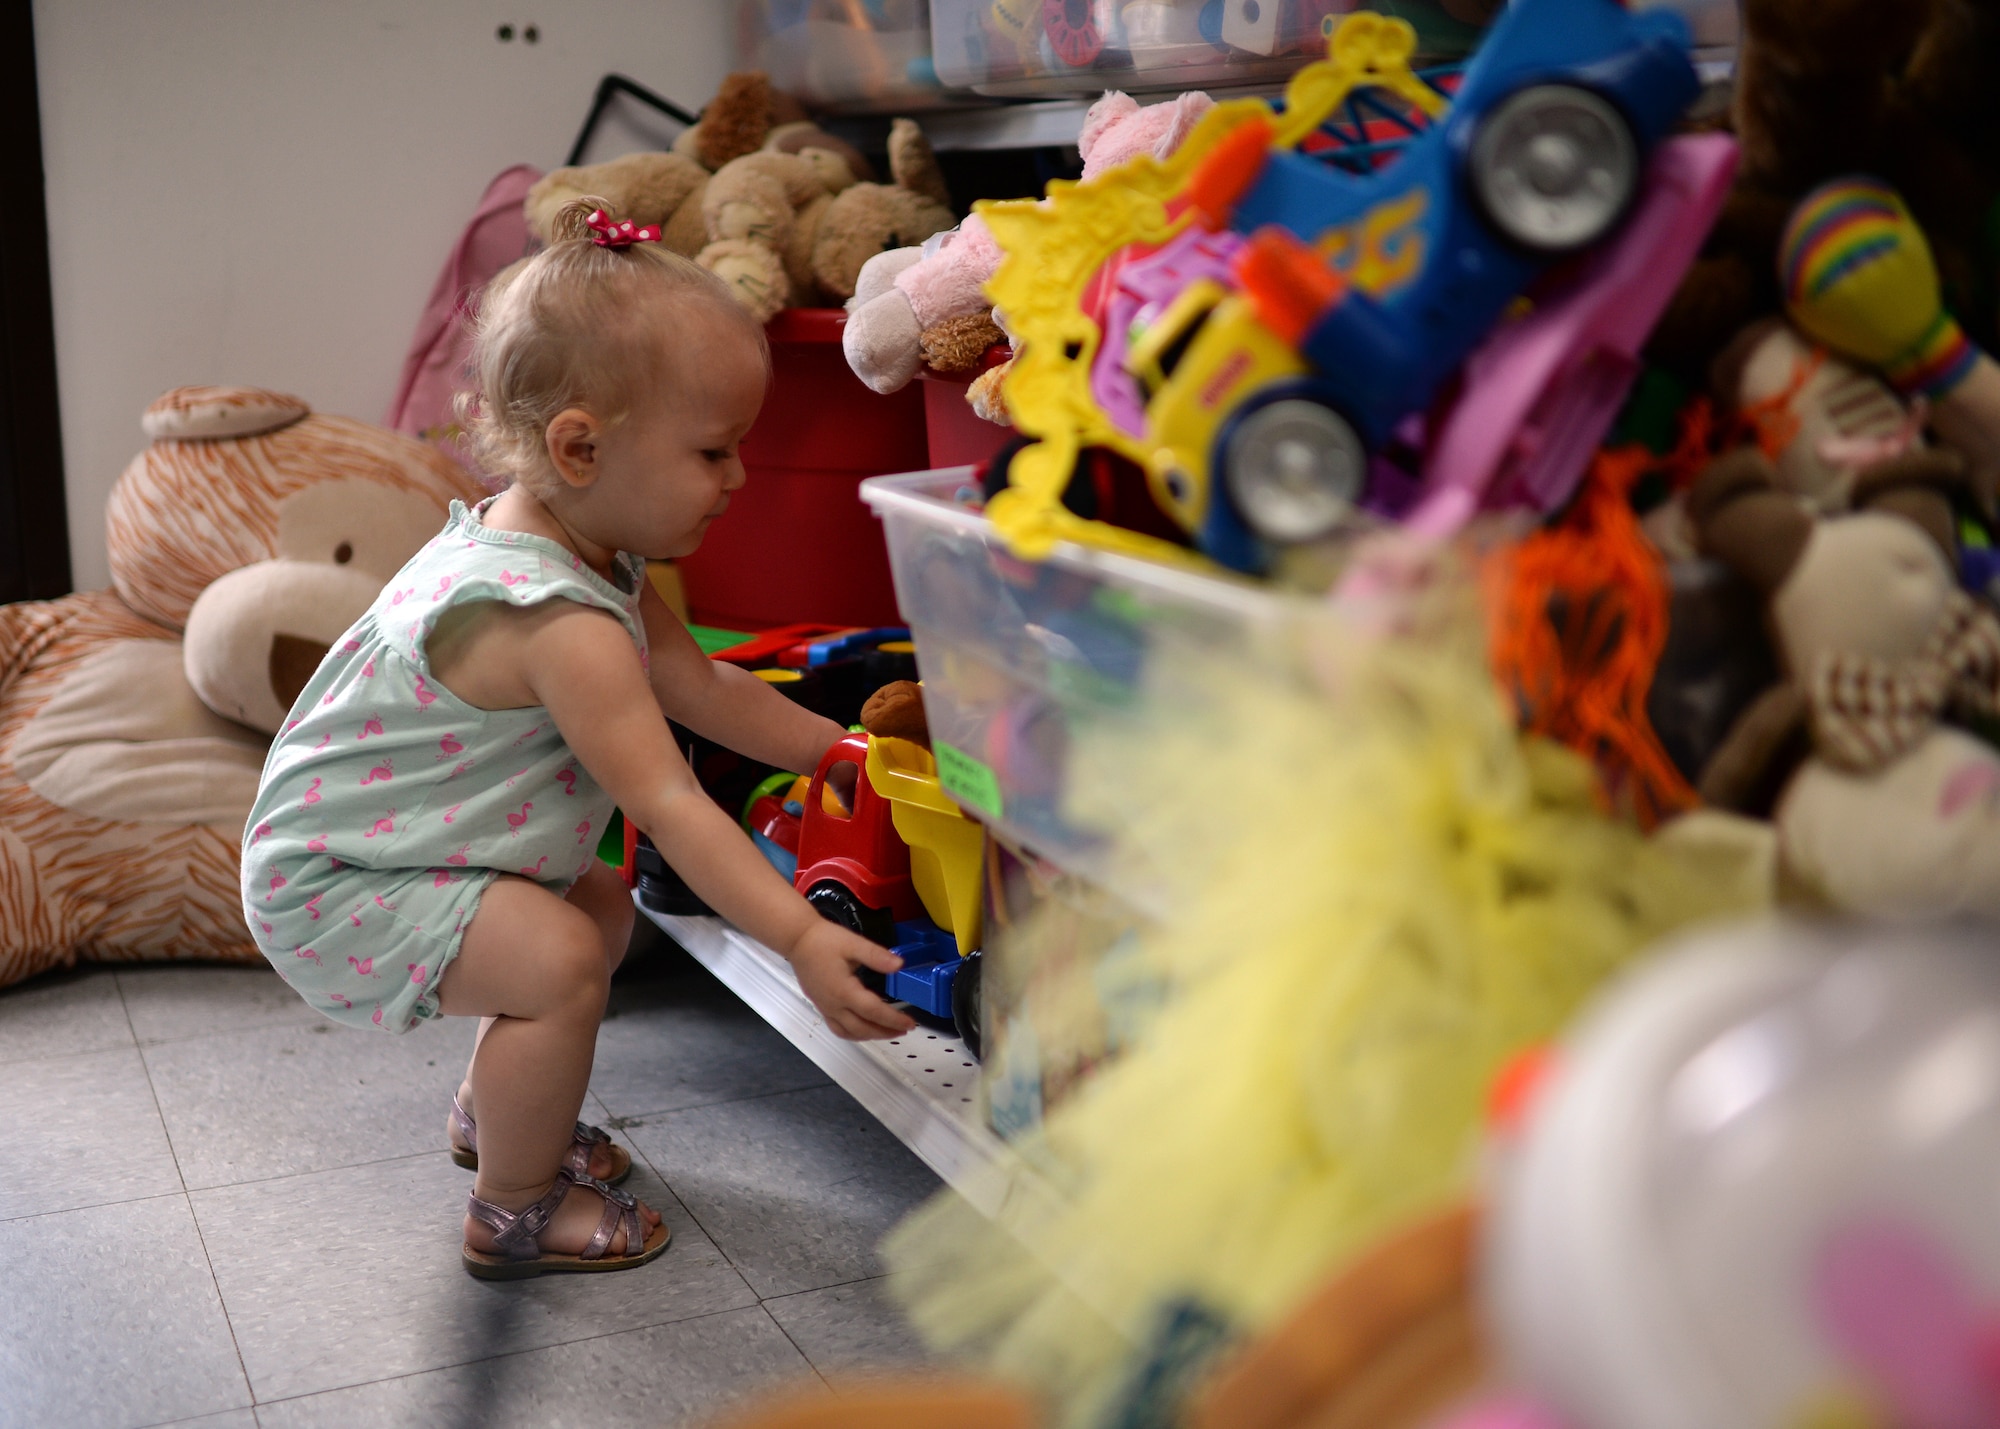 Loralei, daughter of U.S. Air Force Staff Sgt. Justin Blakeman, 52nd Component Maintenance Squadron and native of Gonzales, La., selects a toy July 15, 2014, from the children section of the Airman's Attic at Spangdahlem Air Base, Germany. The Attic collects donations from base members and redistributes them at no cost to service members. However, a recent influx of donations to the Attic has forced the staff to recycle nearly 1,000 pounds of toys, dishware, electronics and books a month. (U.S. Air Force photo by Staff Sgt. Daryl Knee/Released)